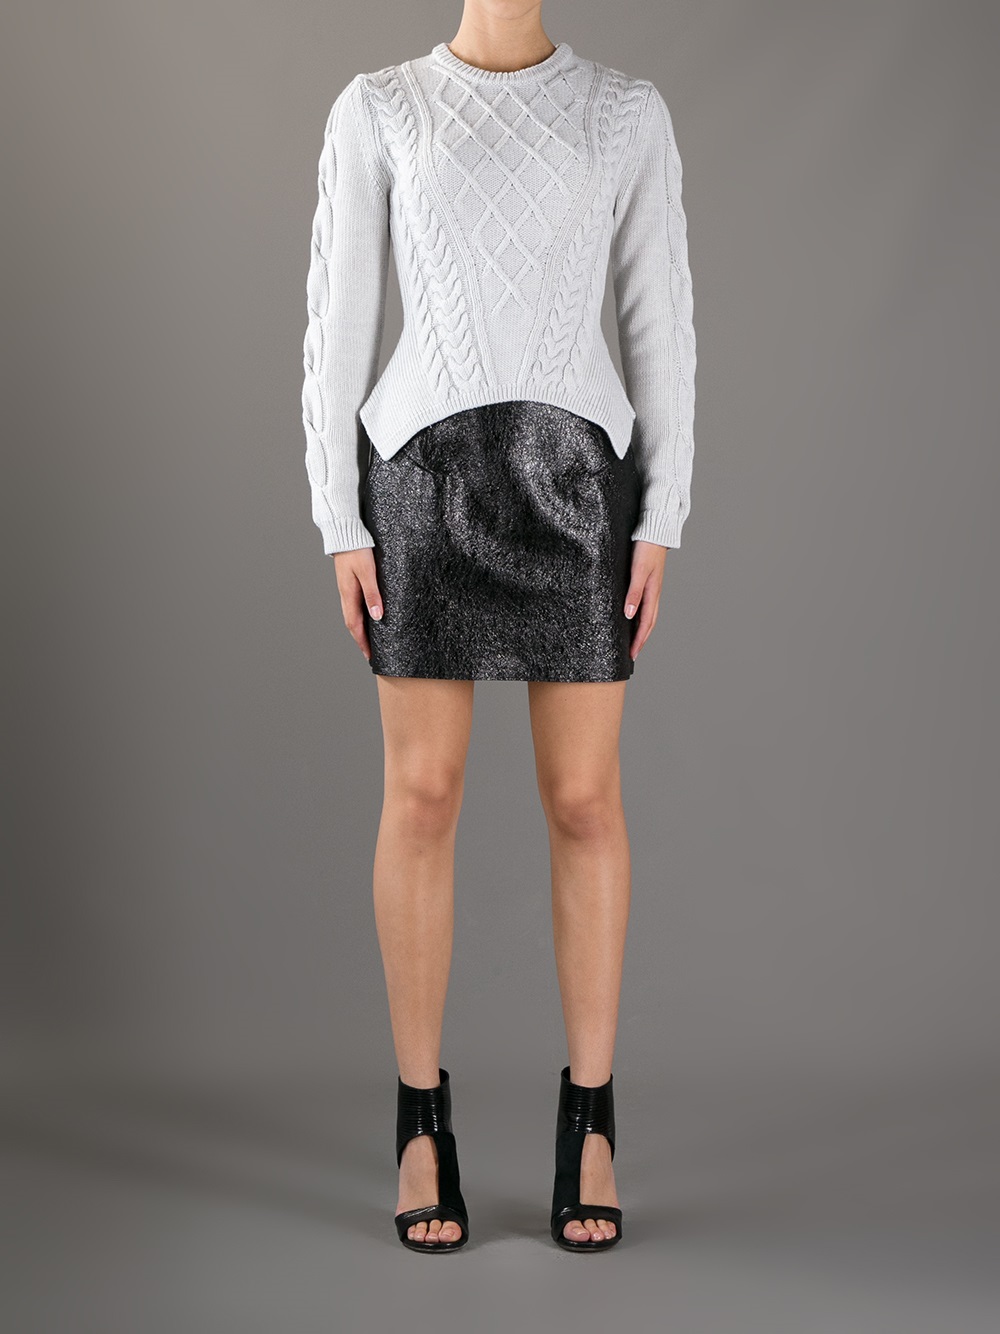 Lyst - Carven Chunky Knit Sweater in White